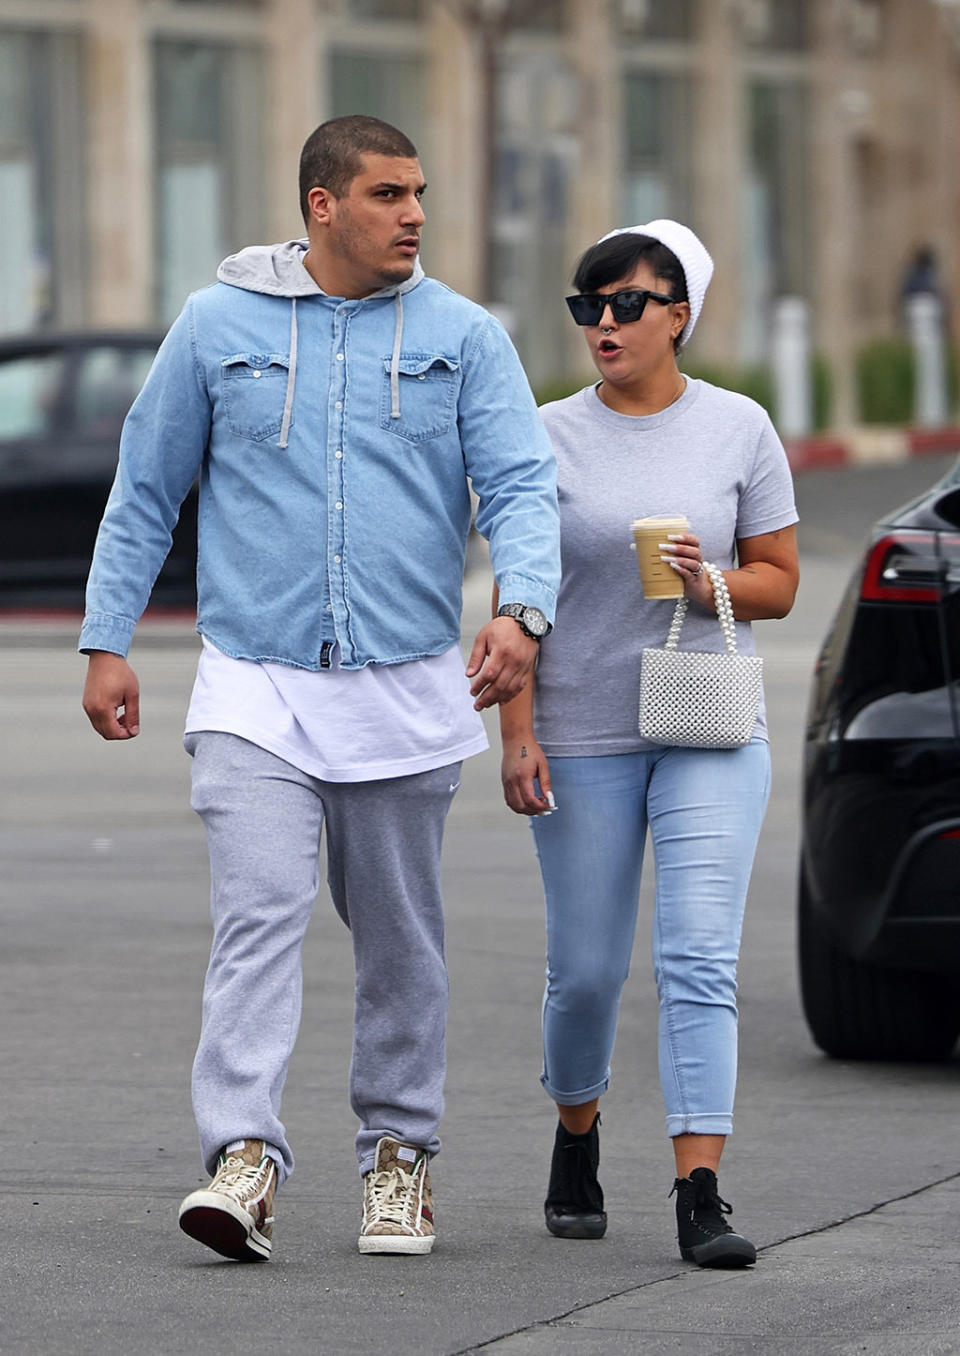 Amanda Bynes and Paul Michael — together in L.A. on Thursday — are spotted for the first time since police were called to their home overnight amid a dispute. He reportedly told police she took his Adderall and was acting out of control, kicking him out of their home. She later used Instagram to publicly accuse him of secretly doing drugs and watching porn. (Photo: BACKGRID)